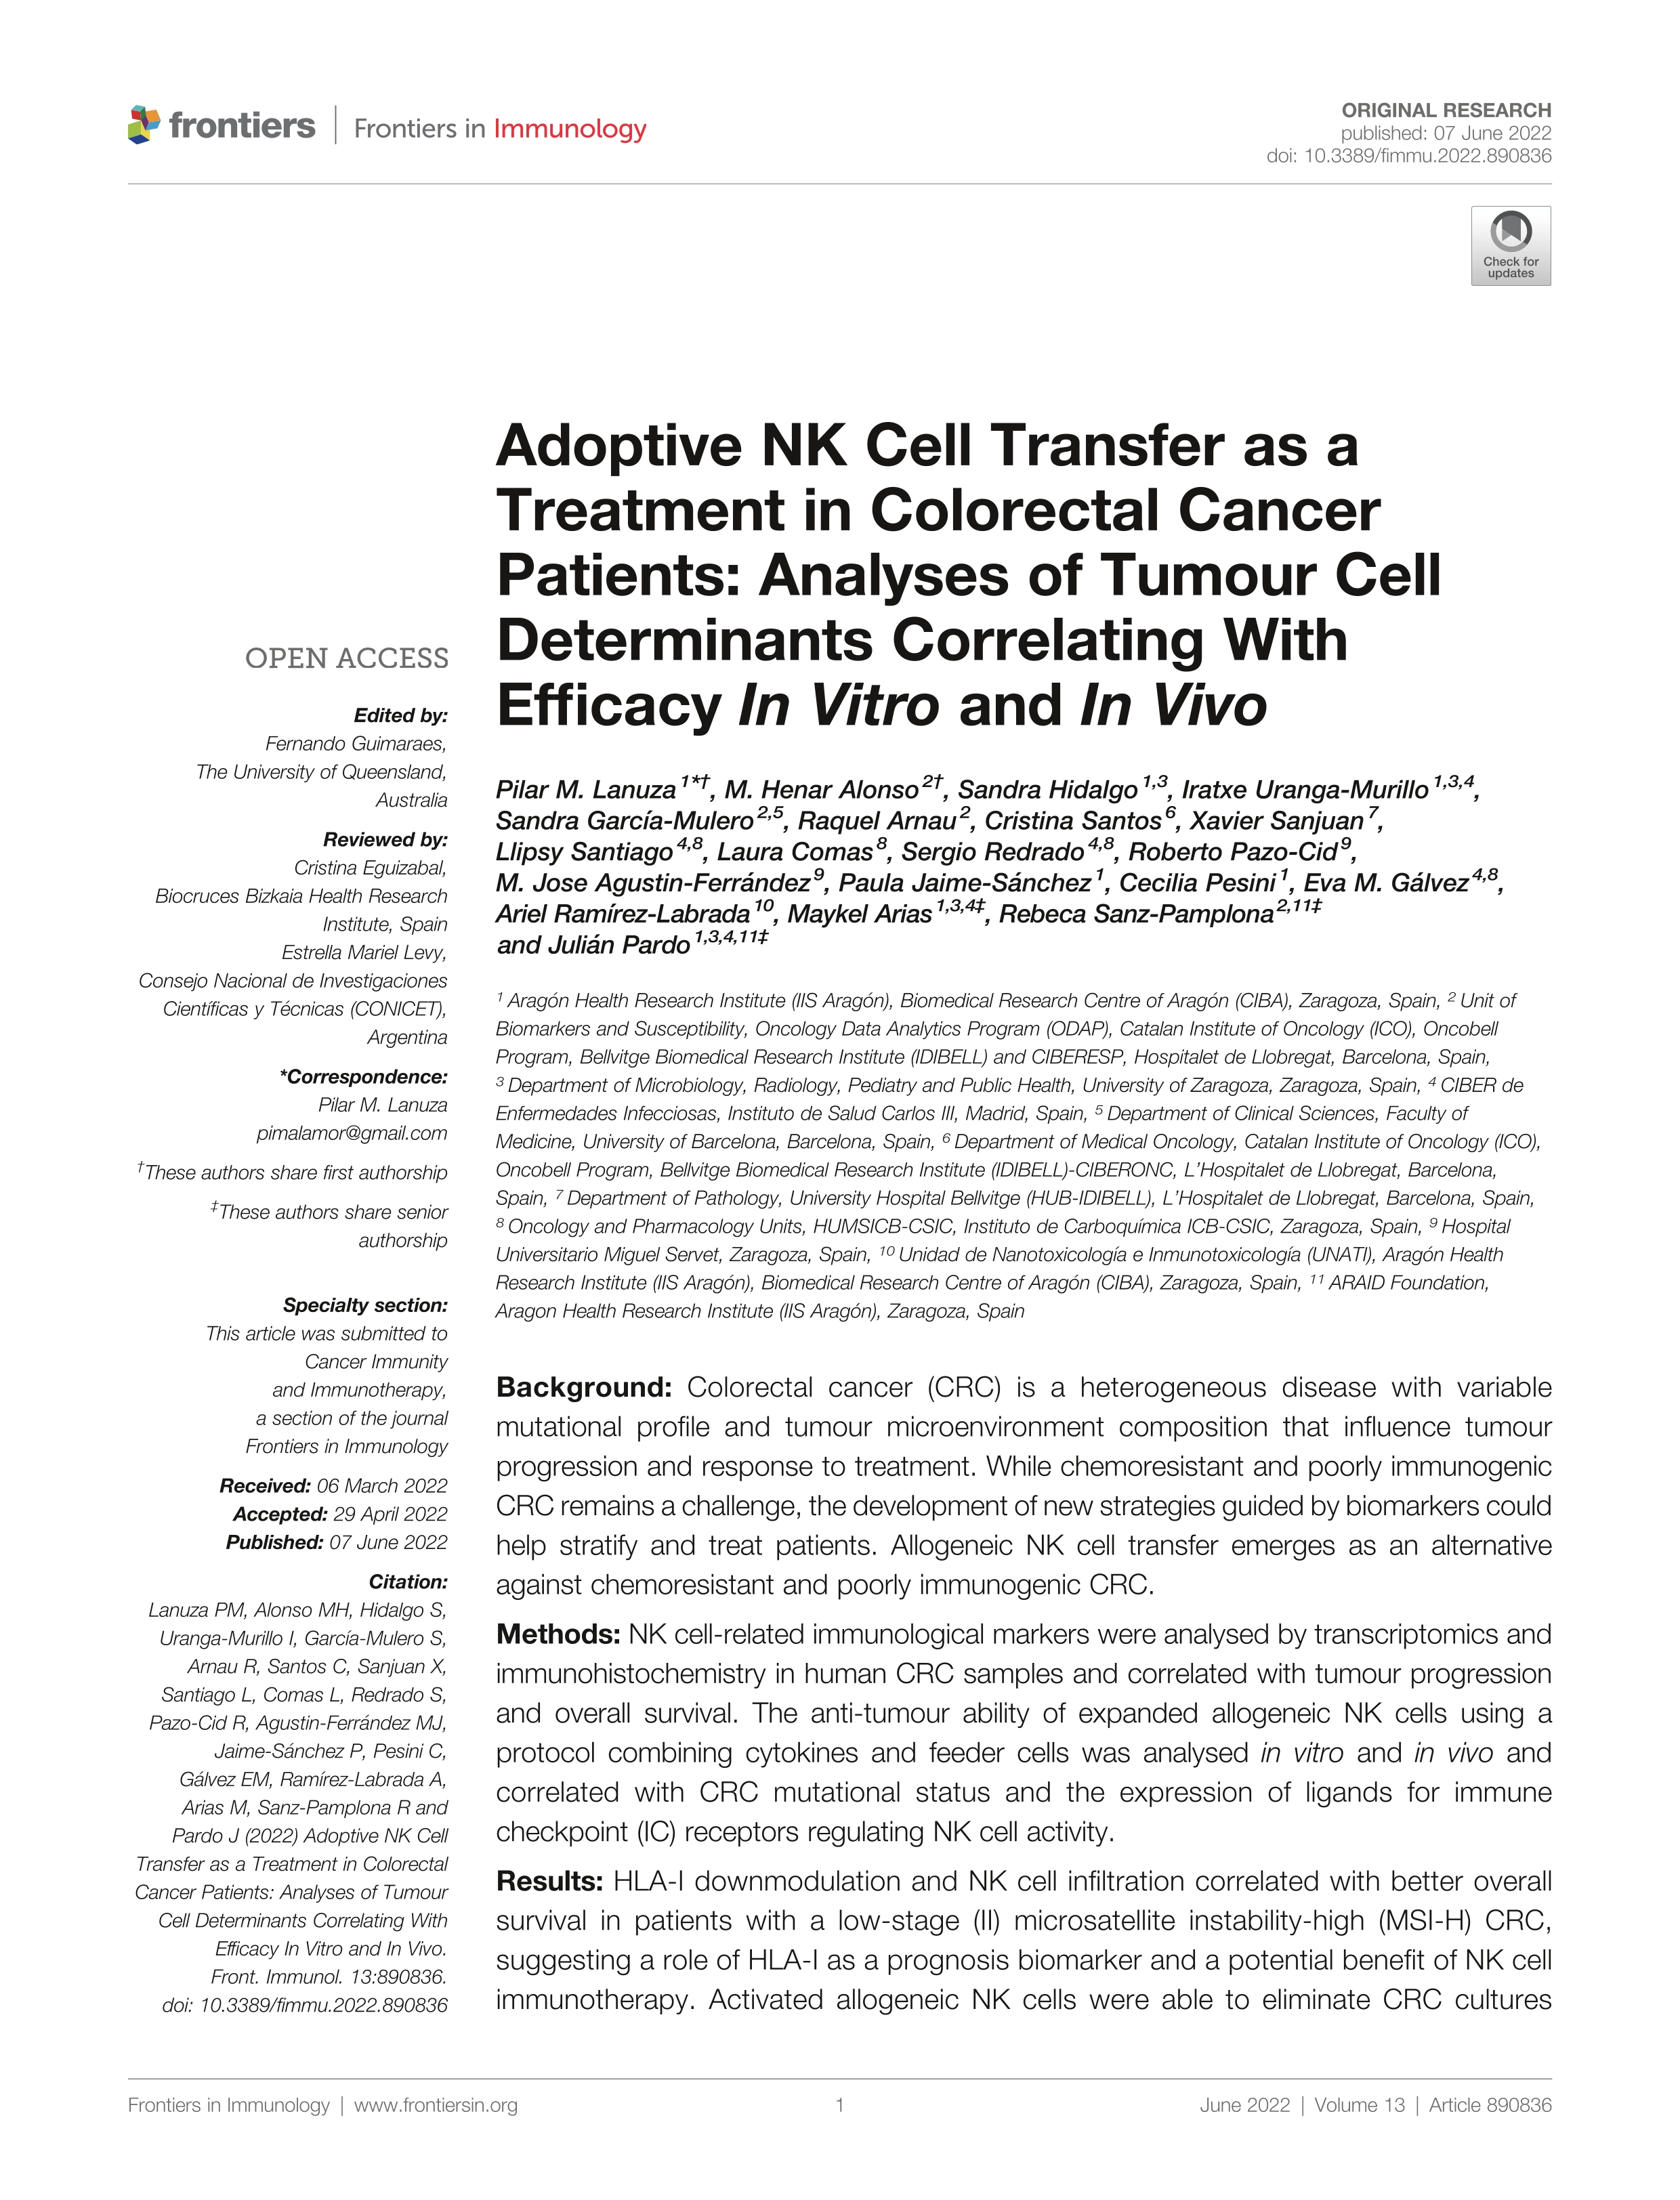 Adoptive NK Cell Transfer as a Treatment in Colorectal Cancer Patients: Analyses of Tumour Cell Determinants Correlating With Efficacy In Vitro and In Vivo